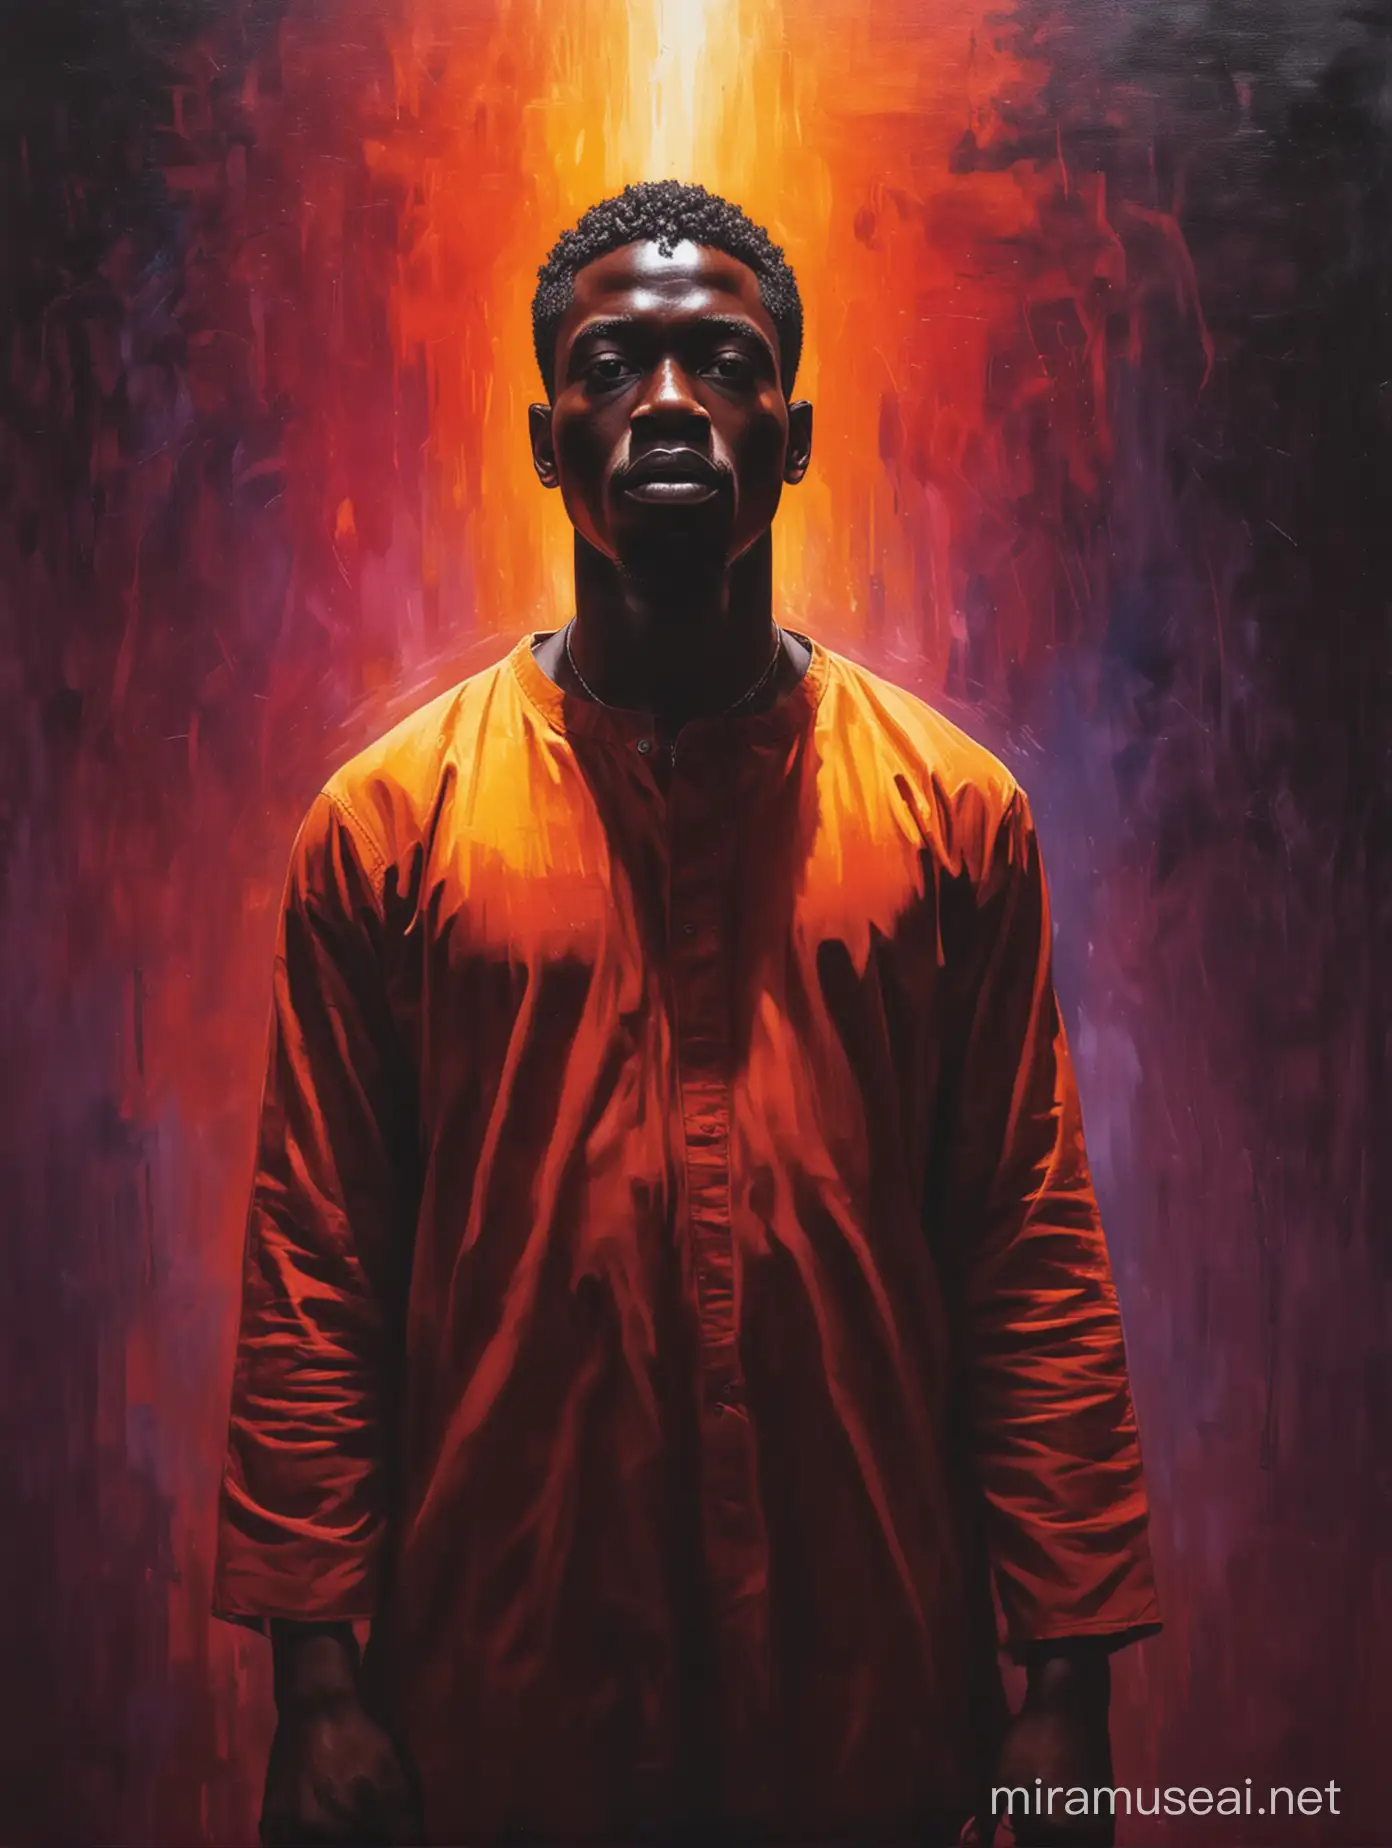 A painting entitled Intro, featuring a black person during slavery, colourful, dramatic light